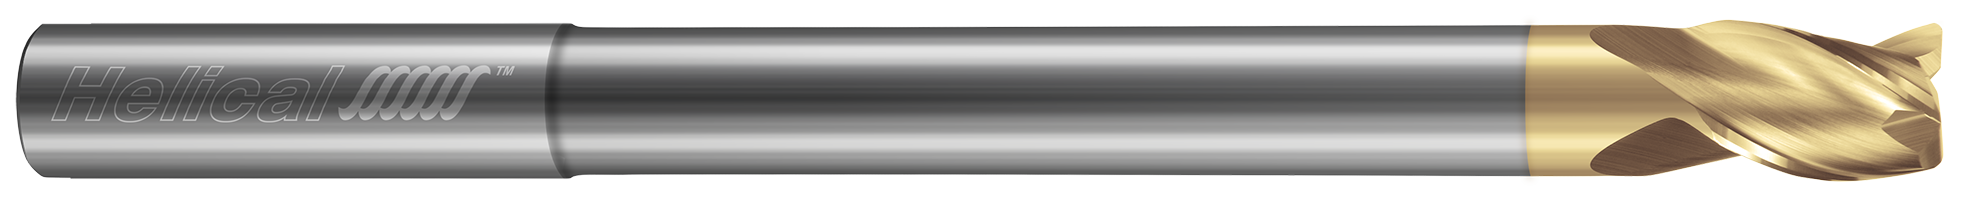 Reduced Neck End Mills for Aluminum